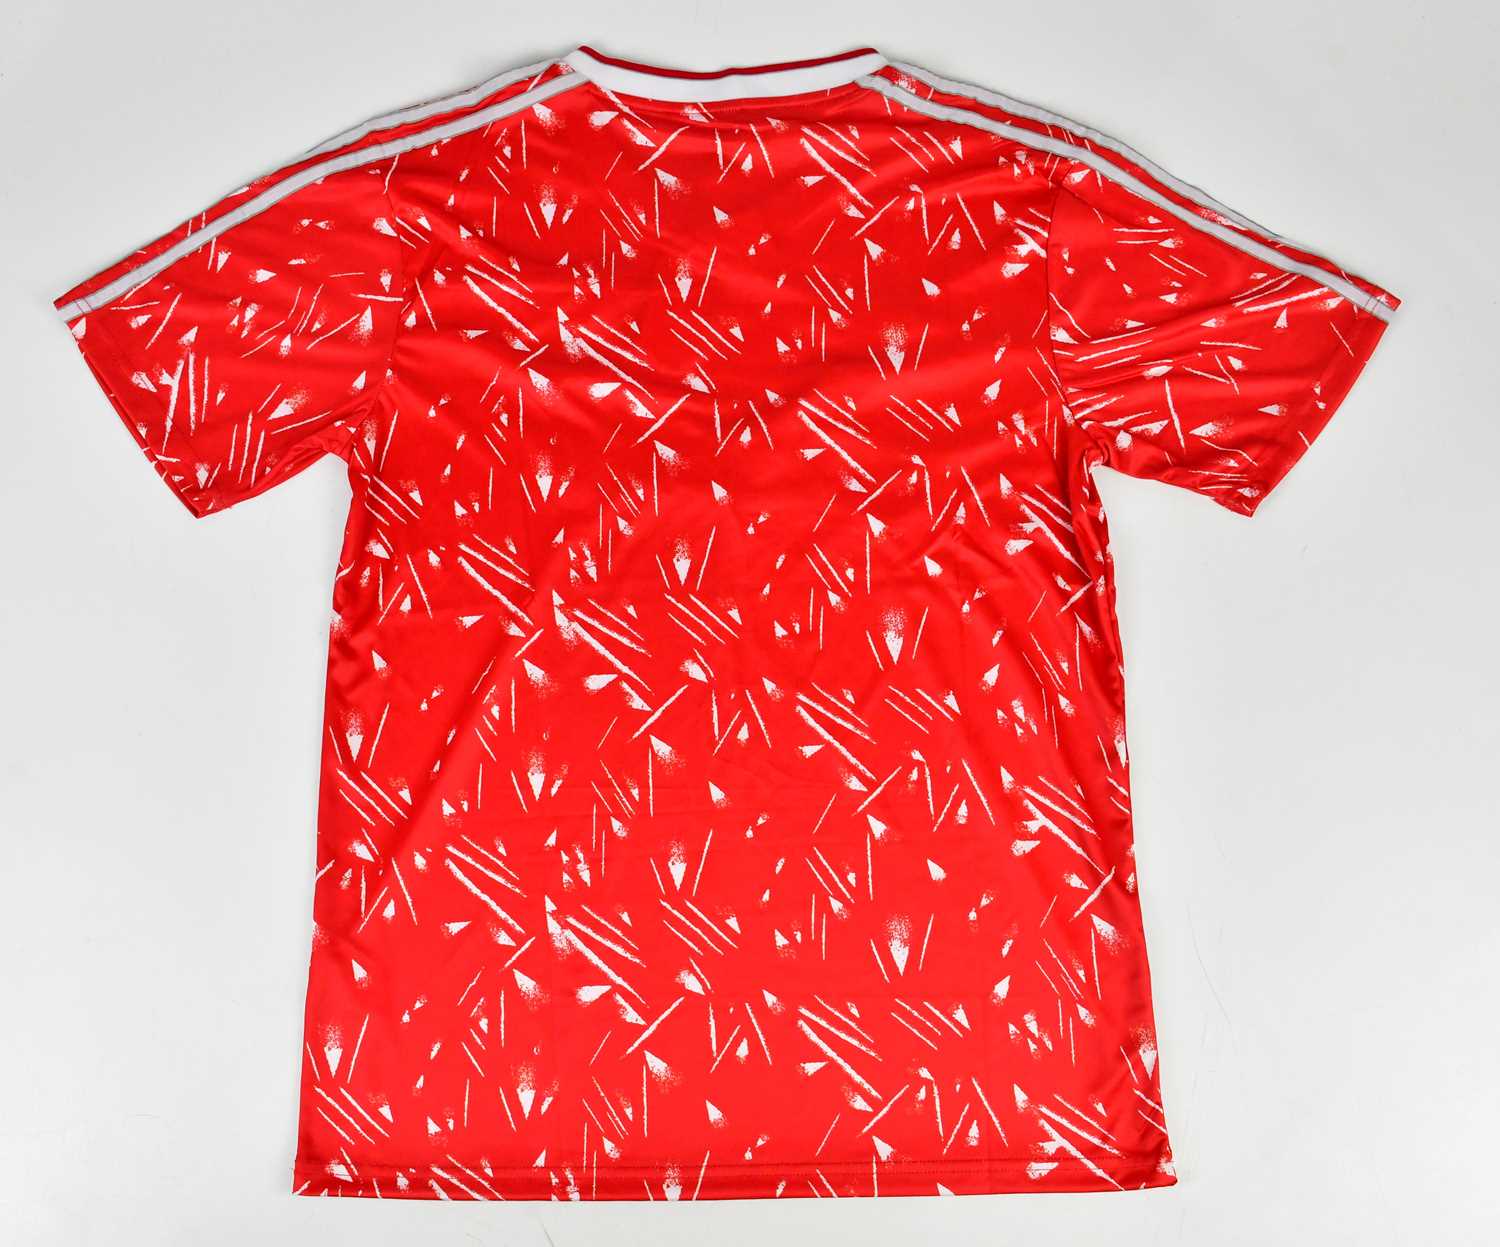 KENNY DALGLISH; a signed Liverpool retro style football shirt, signed to the front, size L. - Image 3 of 3